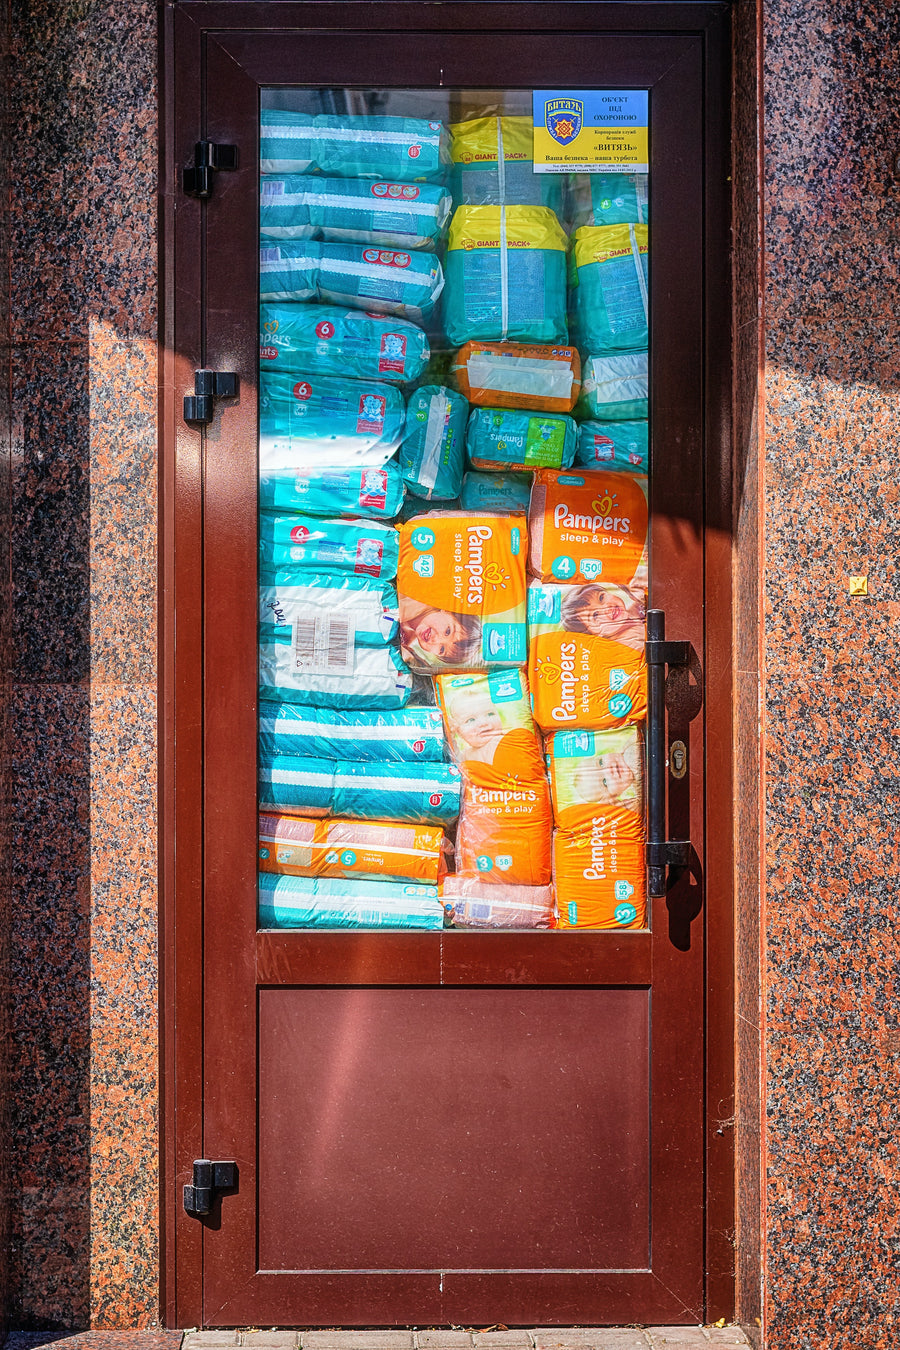 cabinet full of Pampers diapers